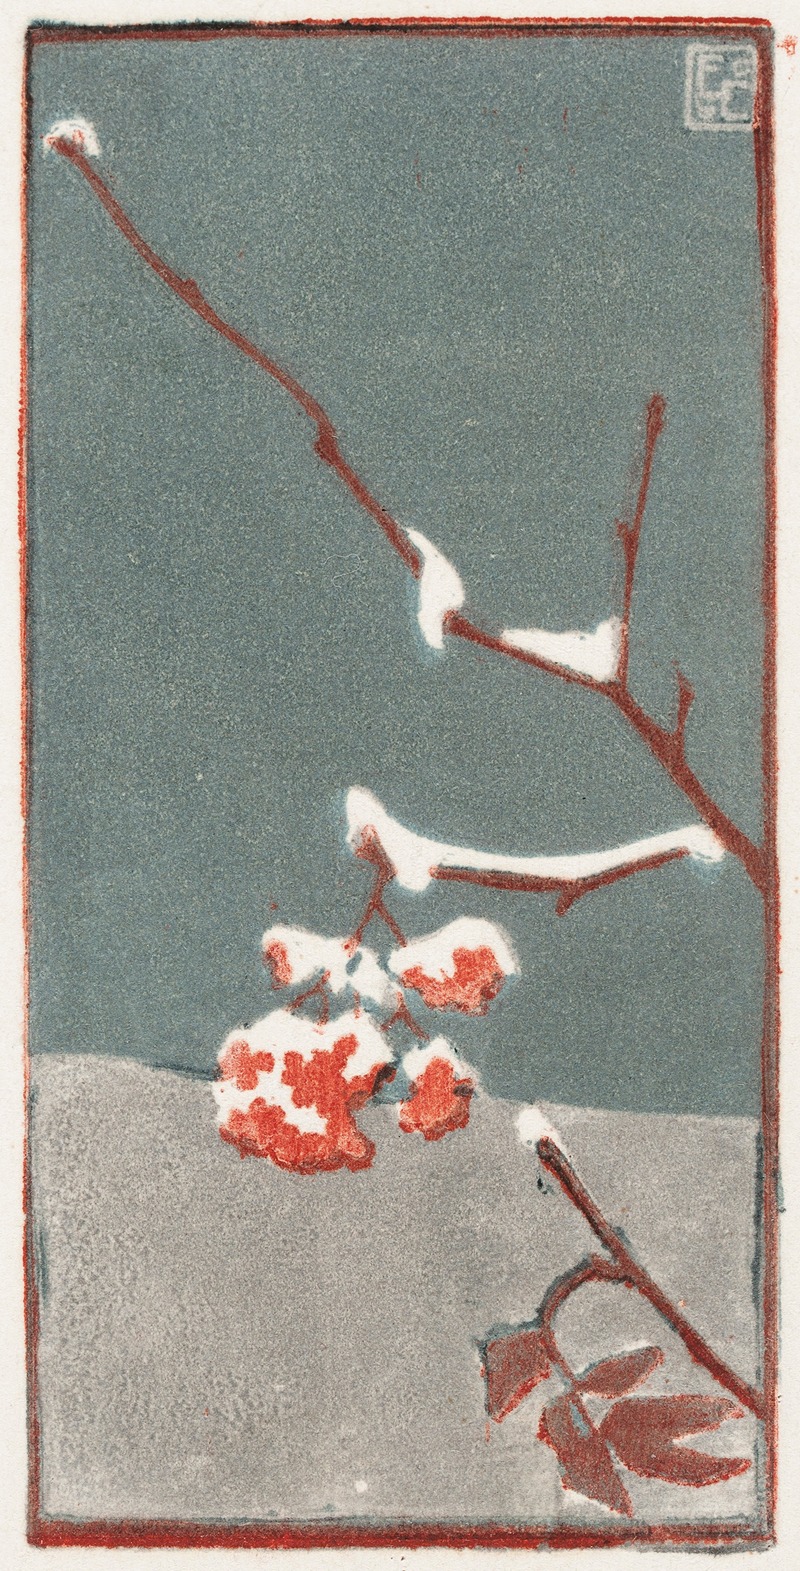 Eric O. W. Ehrström - Cluster of Rowanberries with Snow